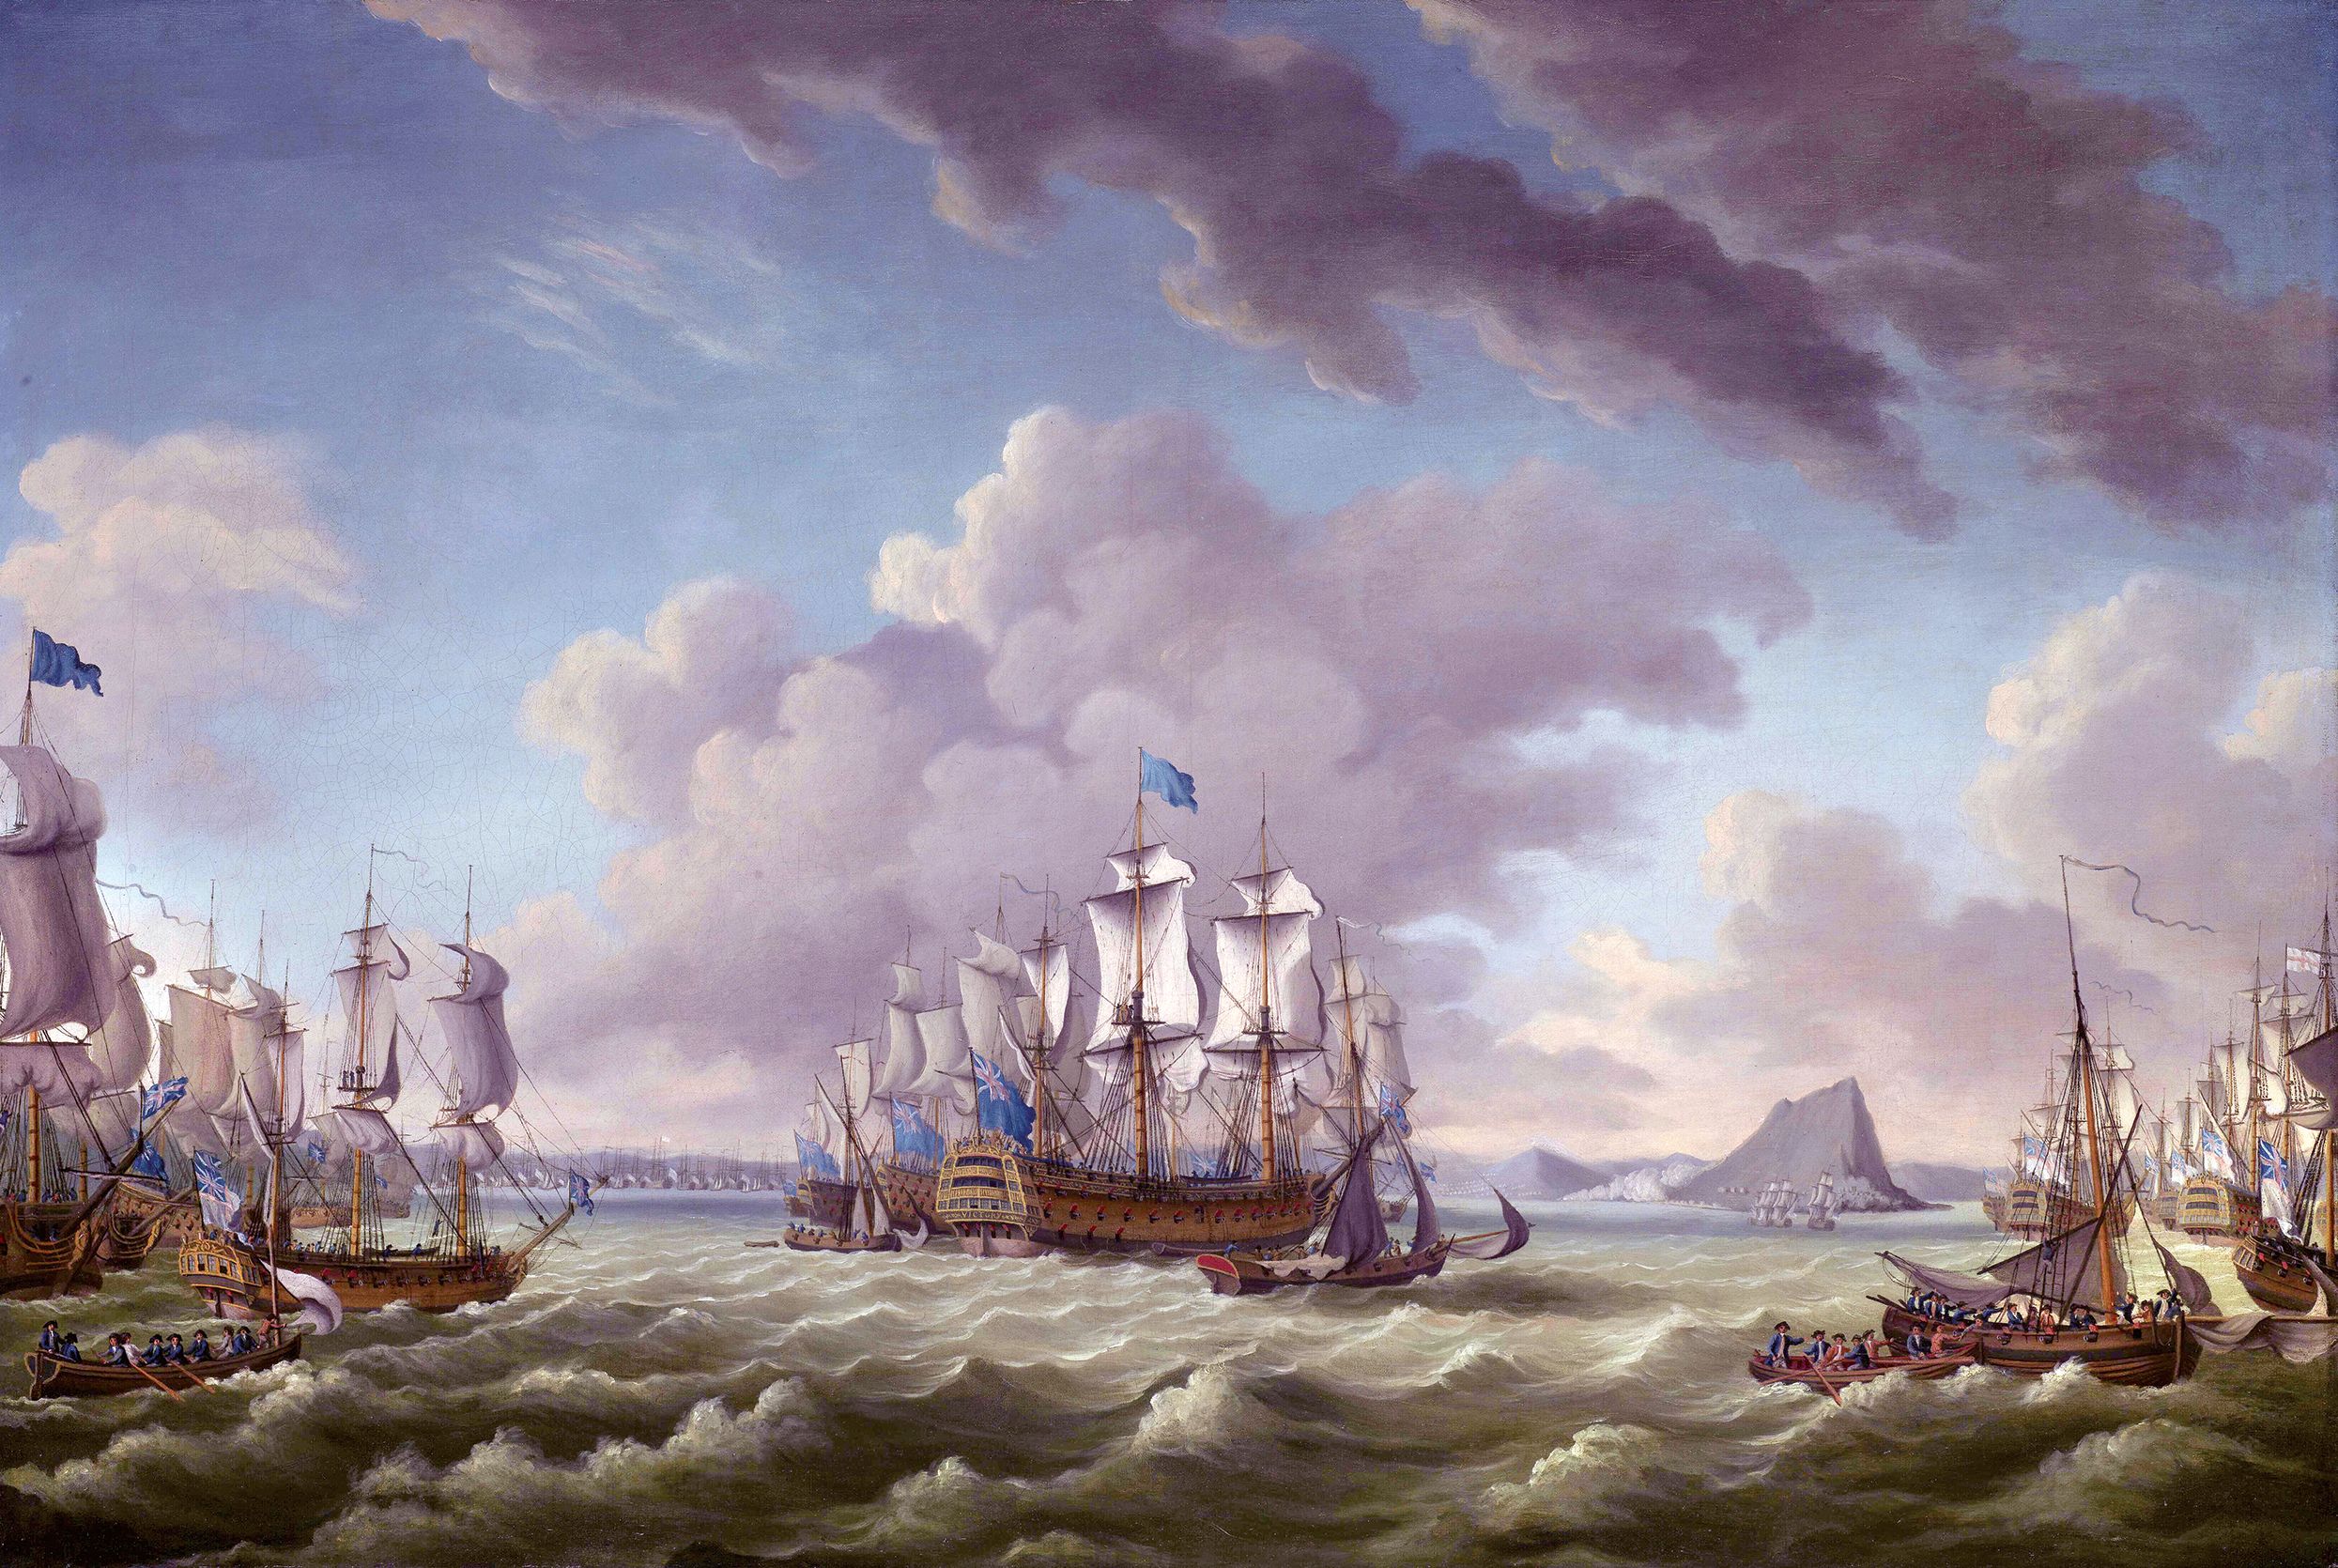 Admiral Richard Howe led 150 merchant ships bearing supplies into the harbor in October 1782. In the last major action of the siege, he then sailed to Cadiz to engage the Franco-Spanish fleet. 